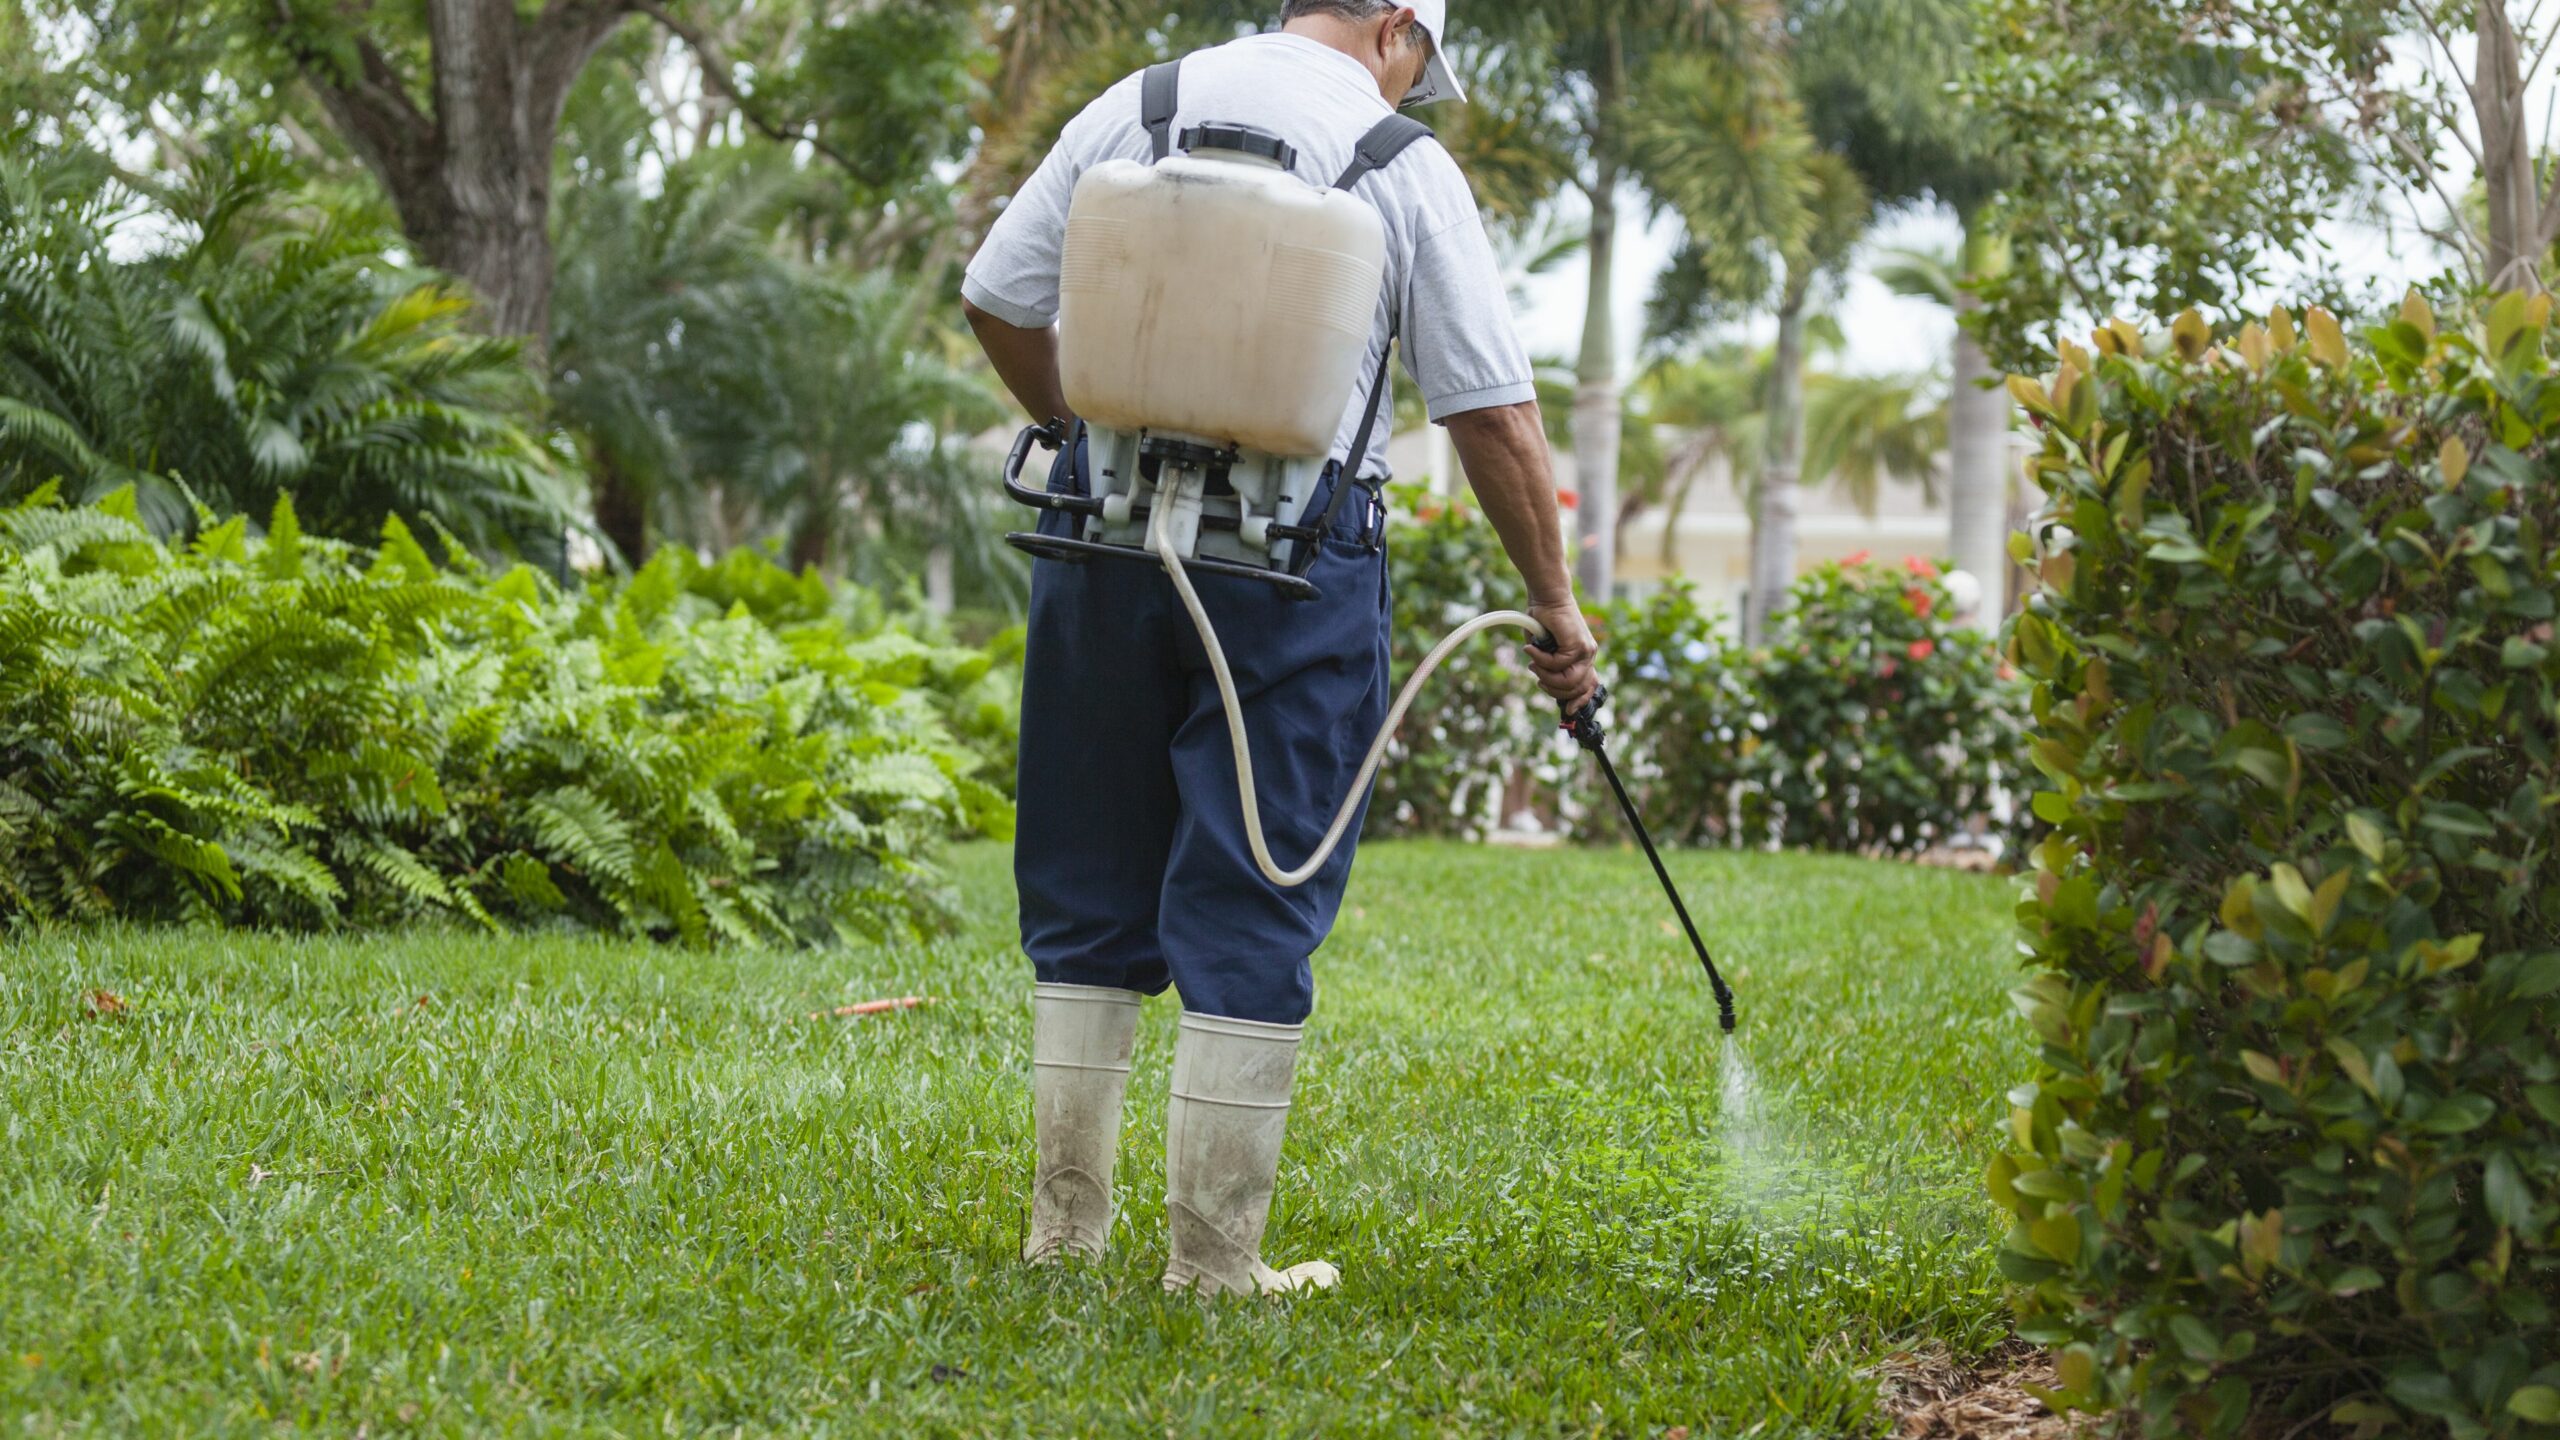 A person in a yard spraying the grass with a substance coming out of a backpack applicator